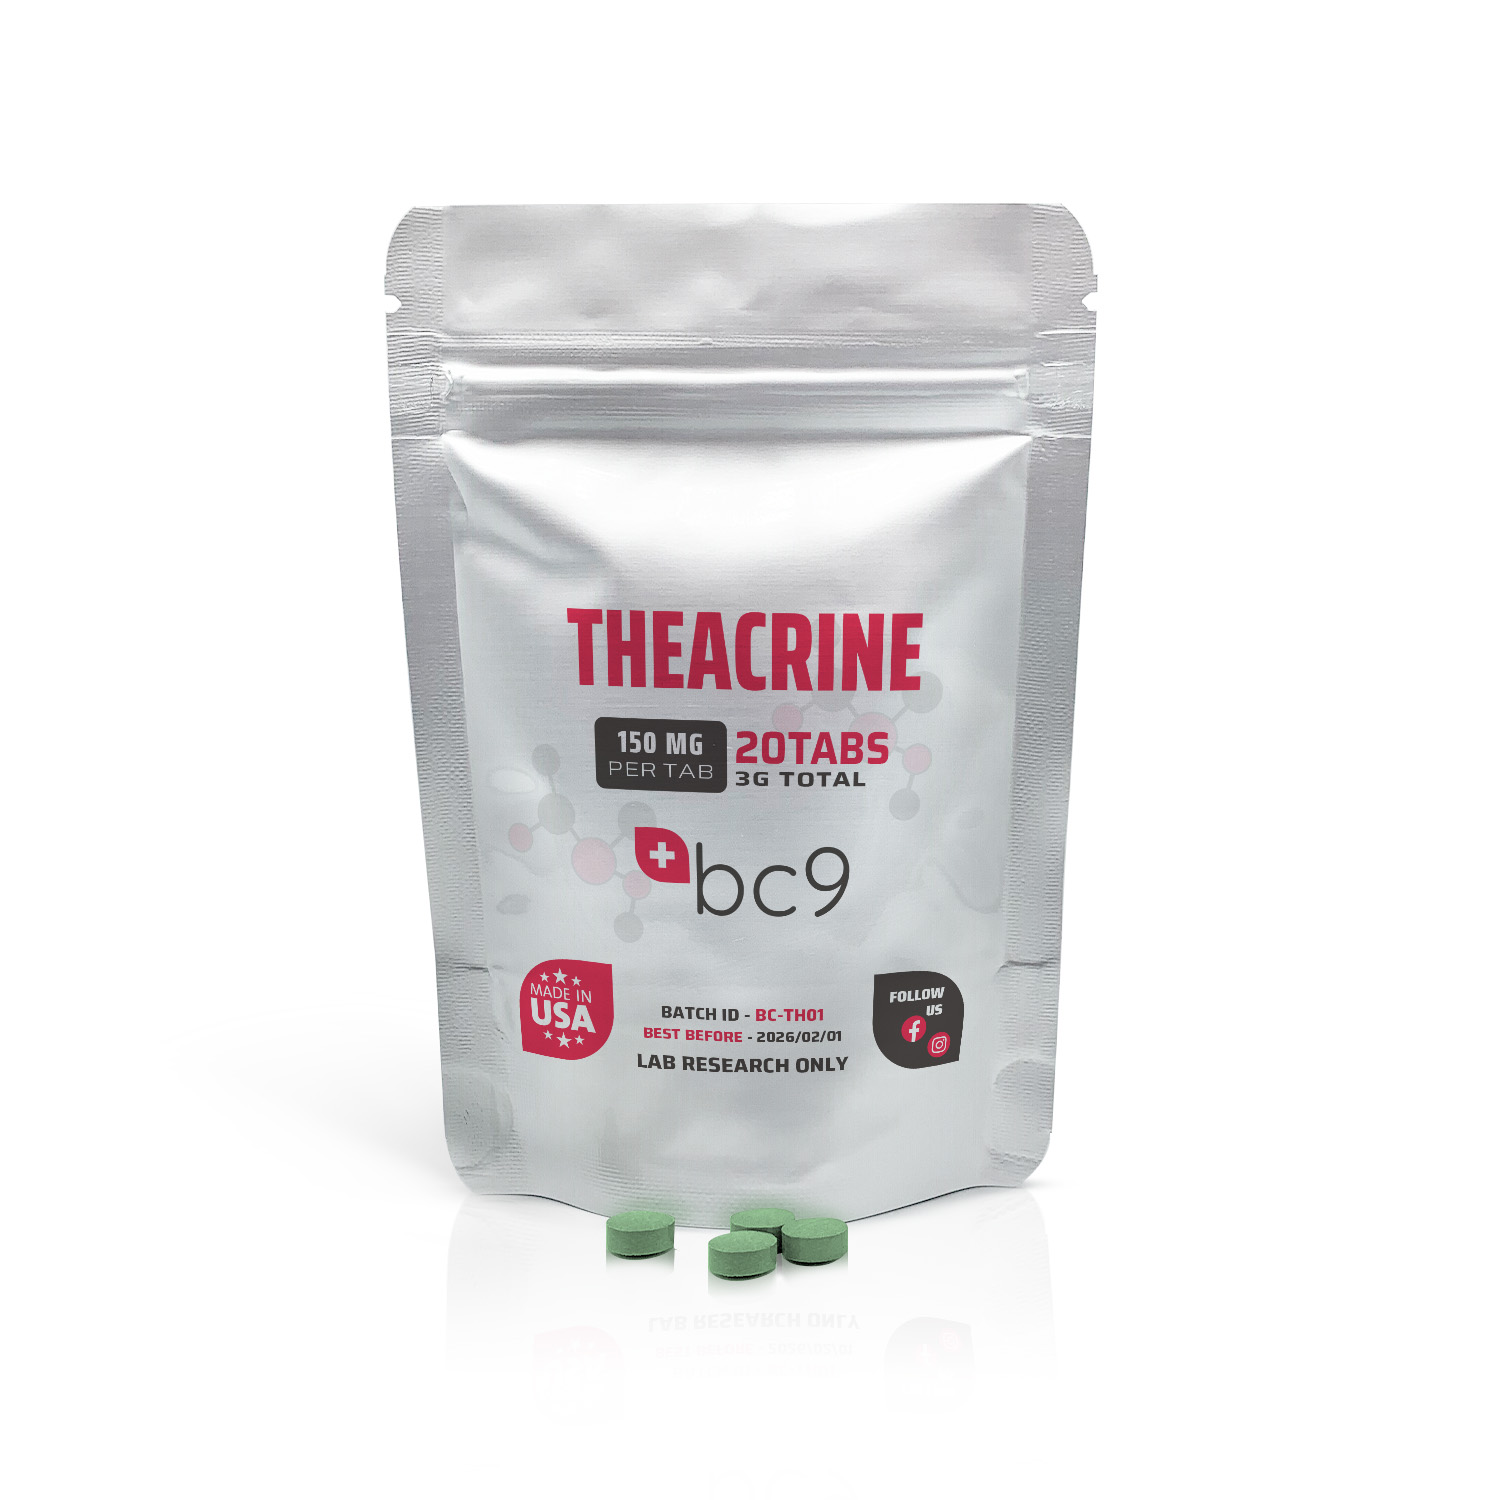 Theacrine Tablets For Sale | Fast Shipping | BC9.org